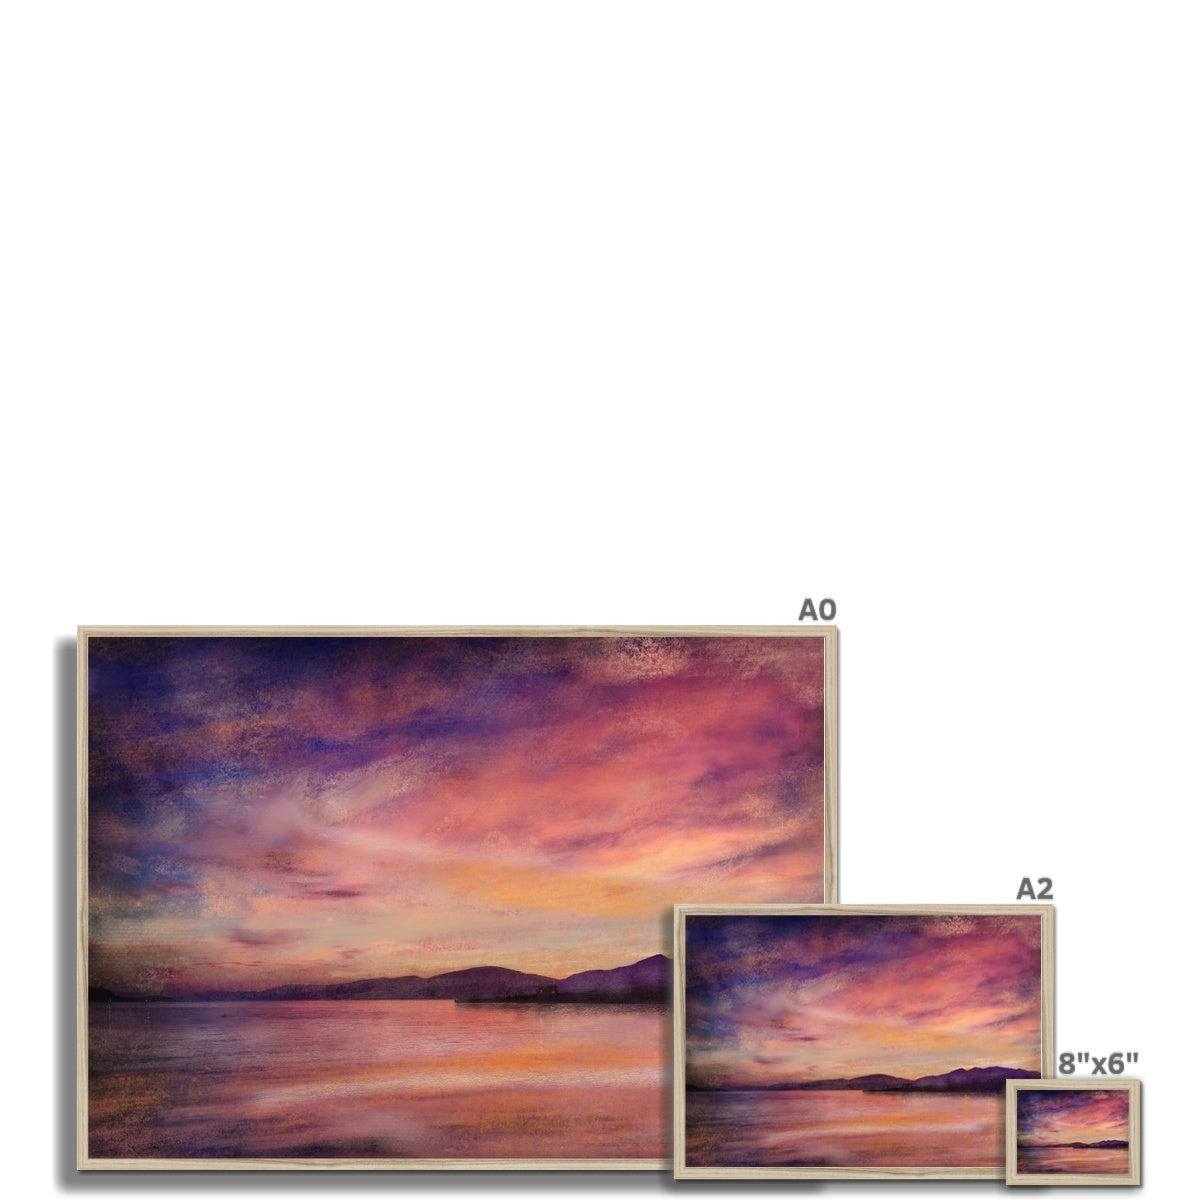 Loch Linnhe Dusk Painting | Framed Prints From Scotland-Framed Prints-Scottish Lochs & Mountains Art Gallery-Paintings, Prints, Homeware, Art Gifts From Scotland By Scottish Artist Kevin Hunter